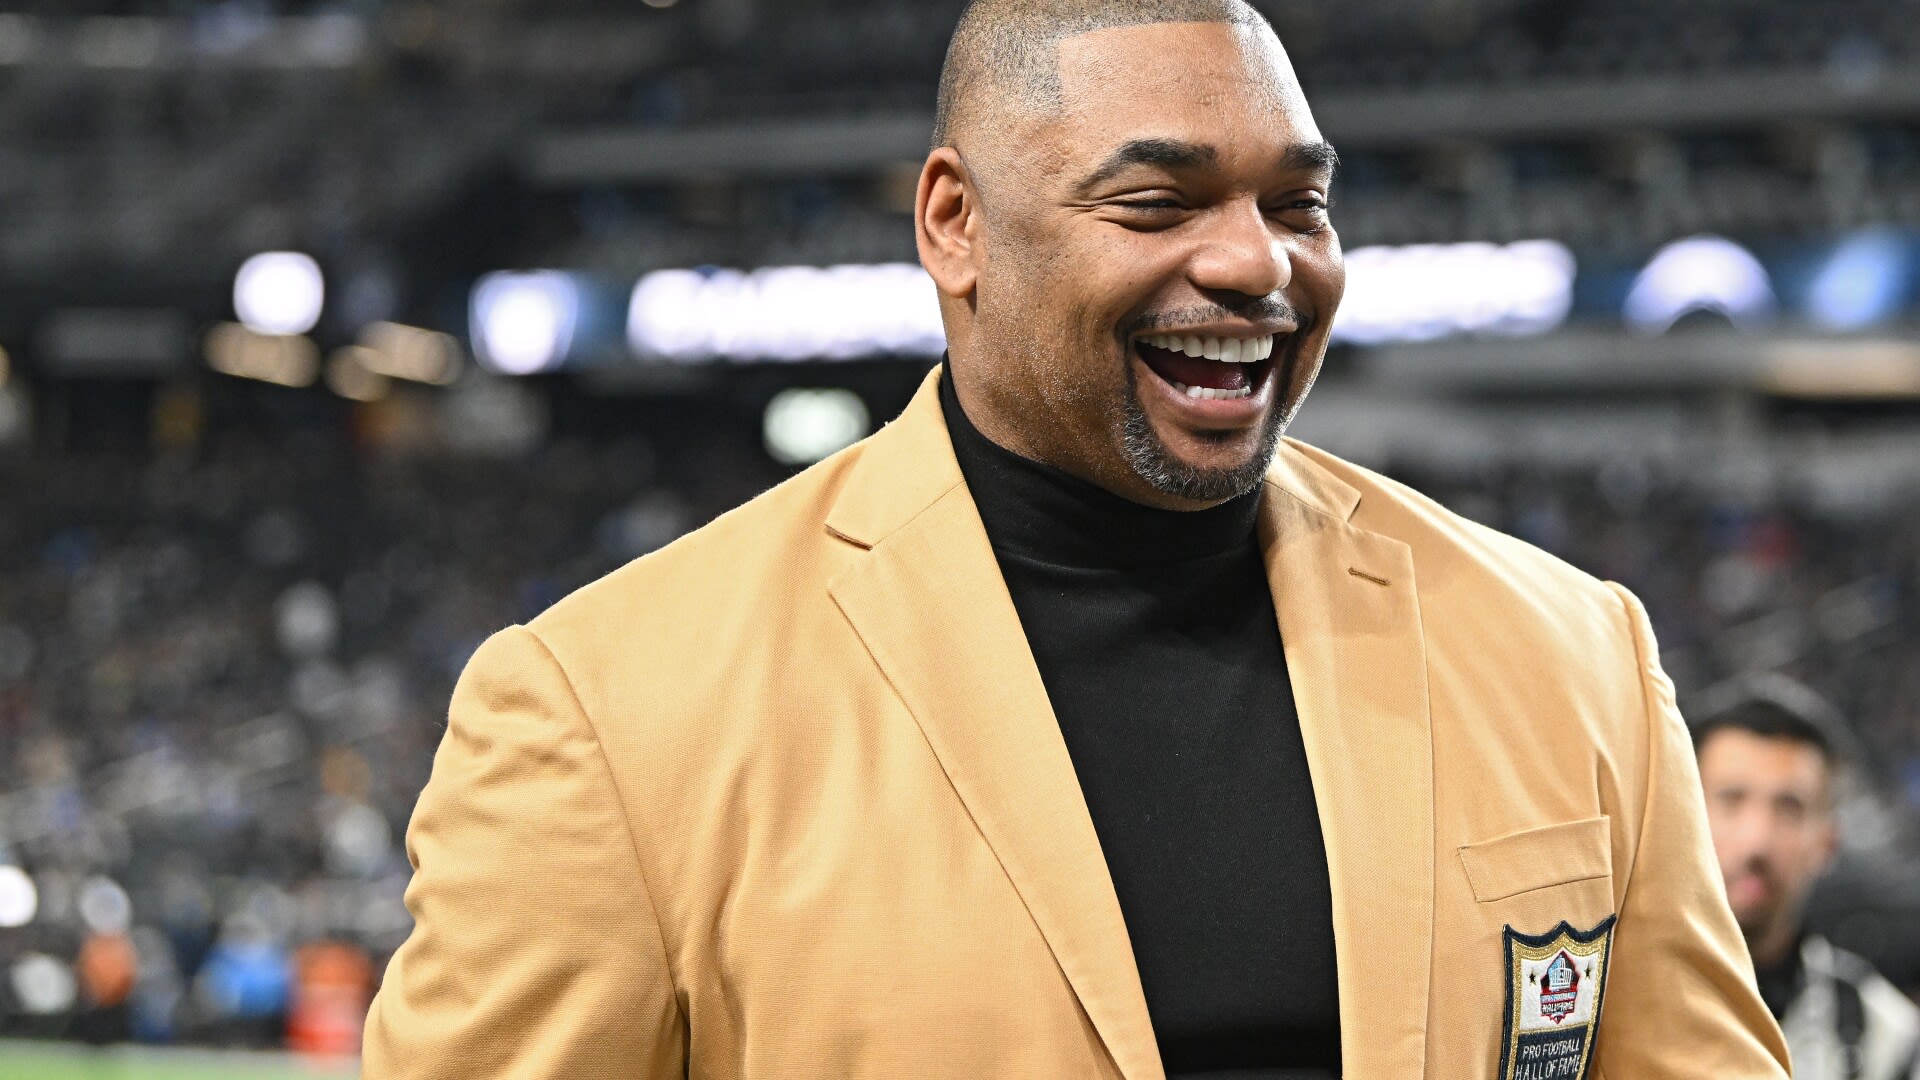 Source: Richard Seymour joins forces with Tom Brady to secure Raiders ownership stake